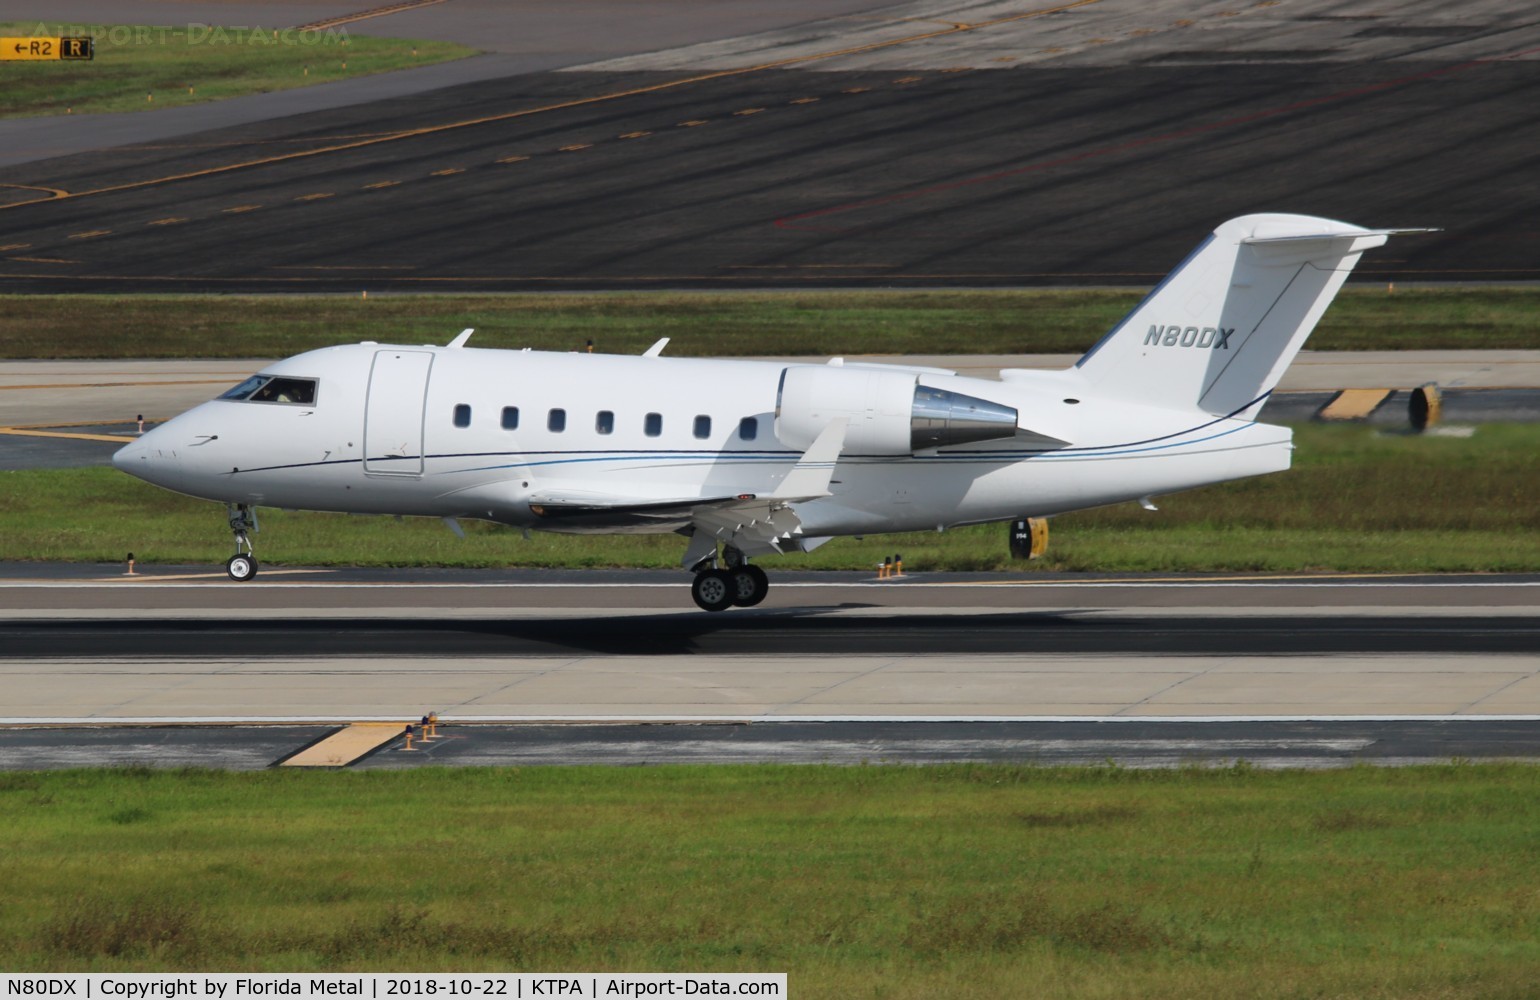 N80DX, 1998 Bombardier Challenger 604 (CL-600-2B16) C/N 5365, Challenger 604 zx